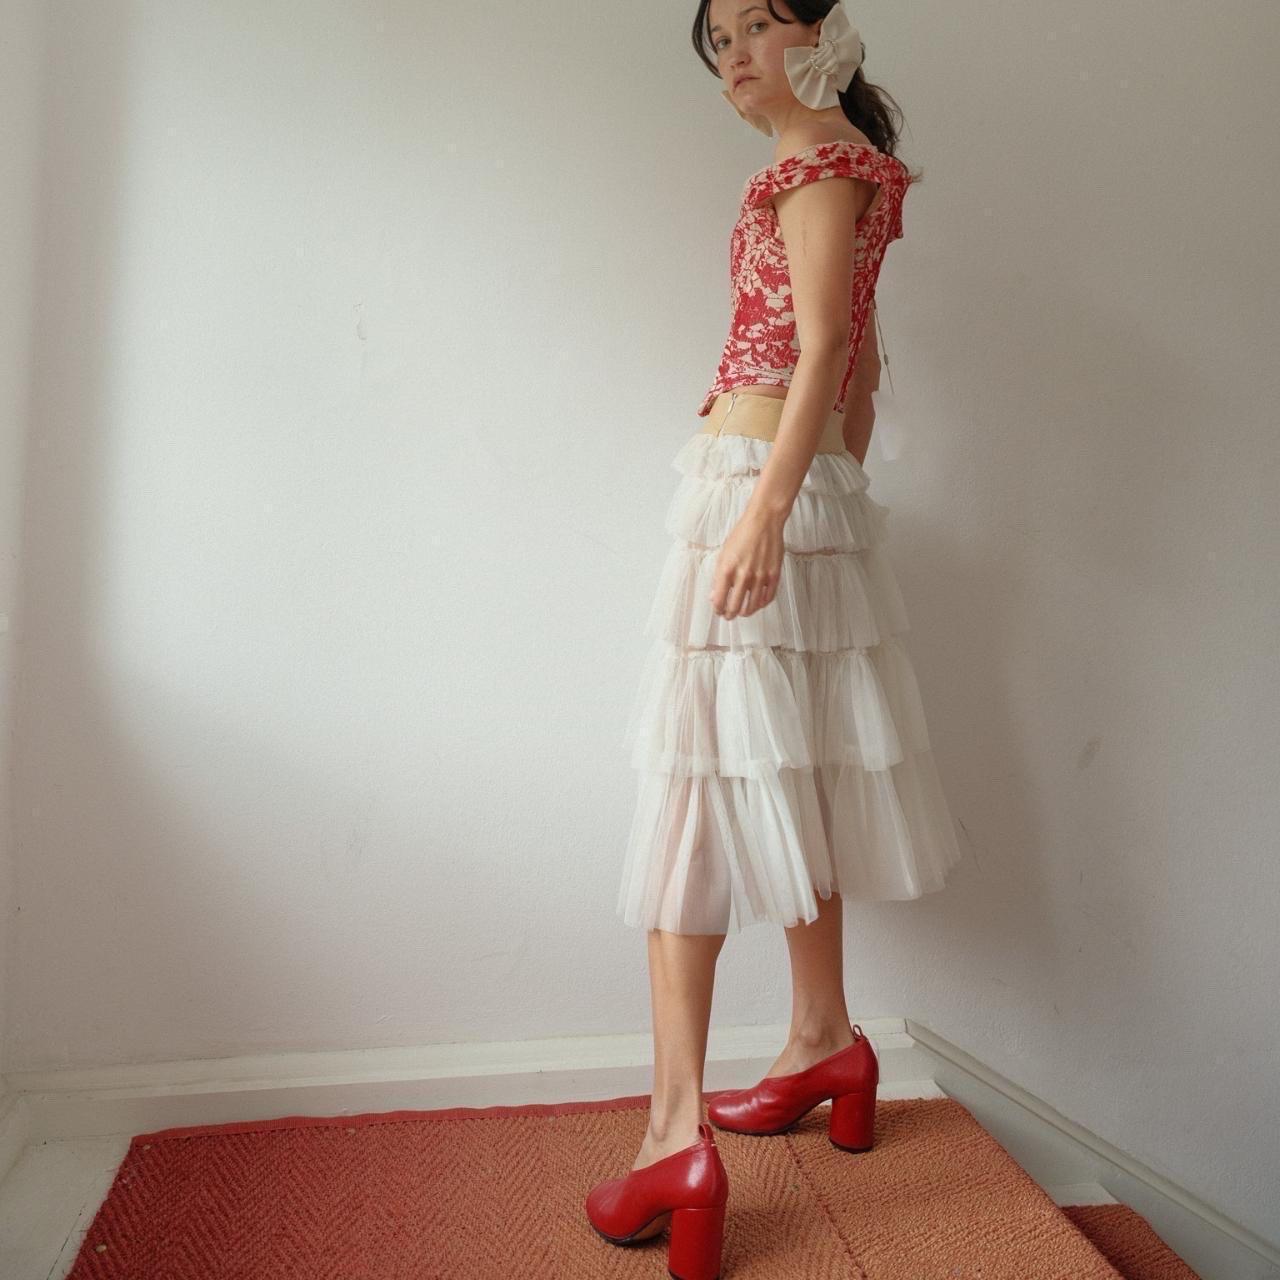 1990s Vivienne Westwood Red Label Ivory and Red Corset

EXCEPTIONAL. Fully boned, red and ivory lace. The perfect unconventional bridal look or event 

Collectors item

Tag size 12 but like all Westwood of this era runs very small more like UK 6-8